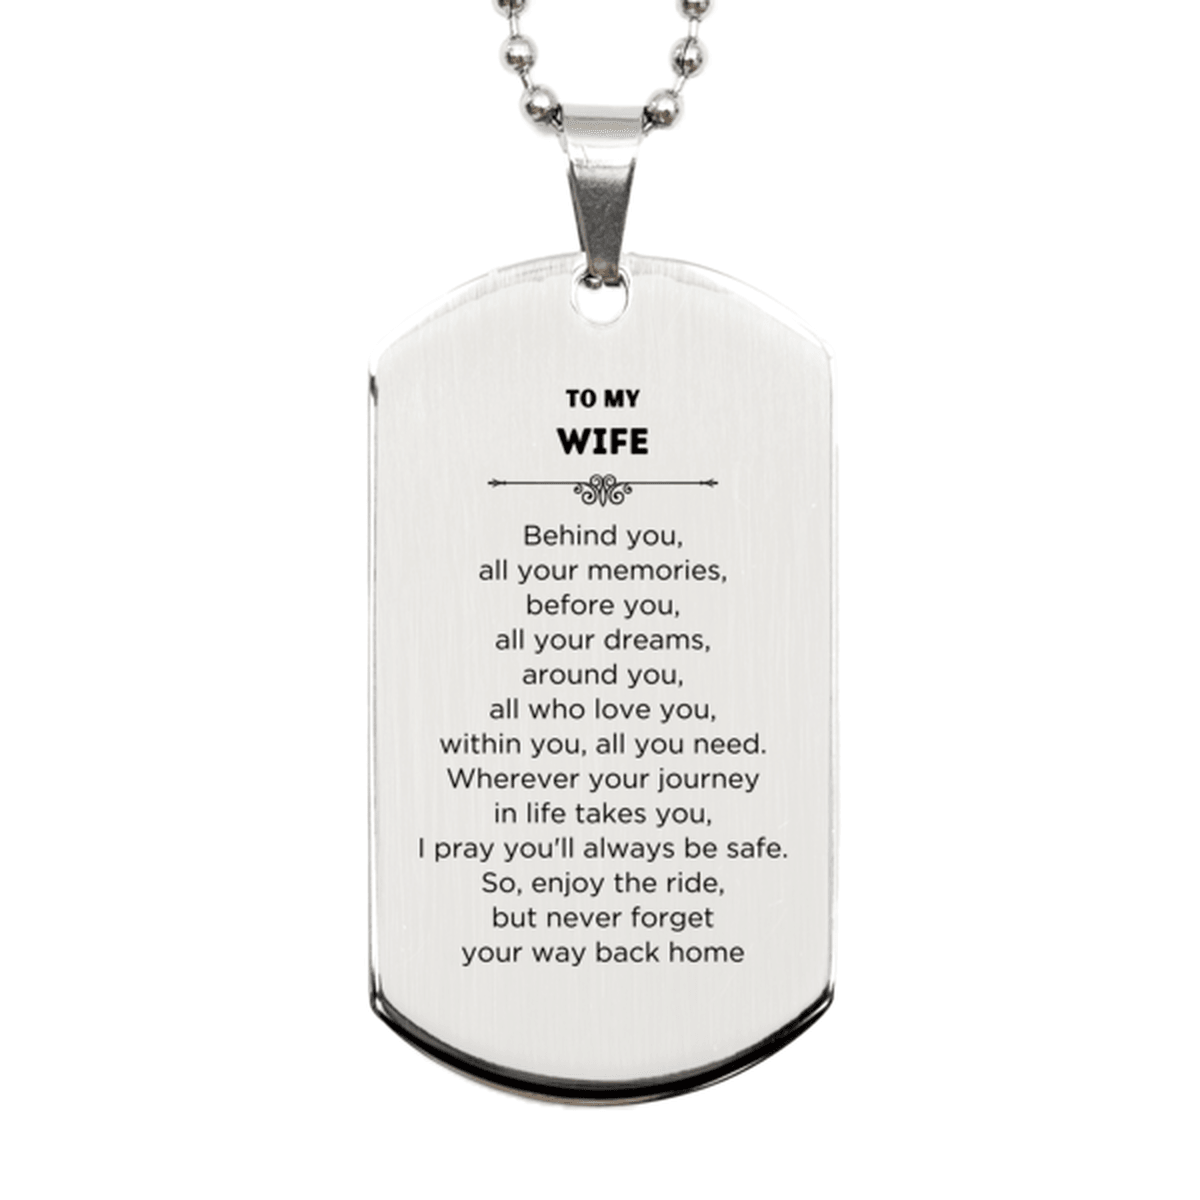 To My Wife Gifts, Inspirational Wife Silver Dog Tag, Sentimental Birthday Christmas Unique Gifts For Wife Behind you, all your memories, before you, all your dreams, around you, all who love you, within you, all you need - Mallard Moon Gift Shop